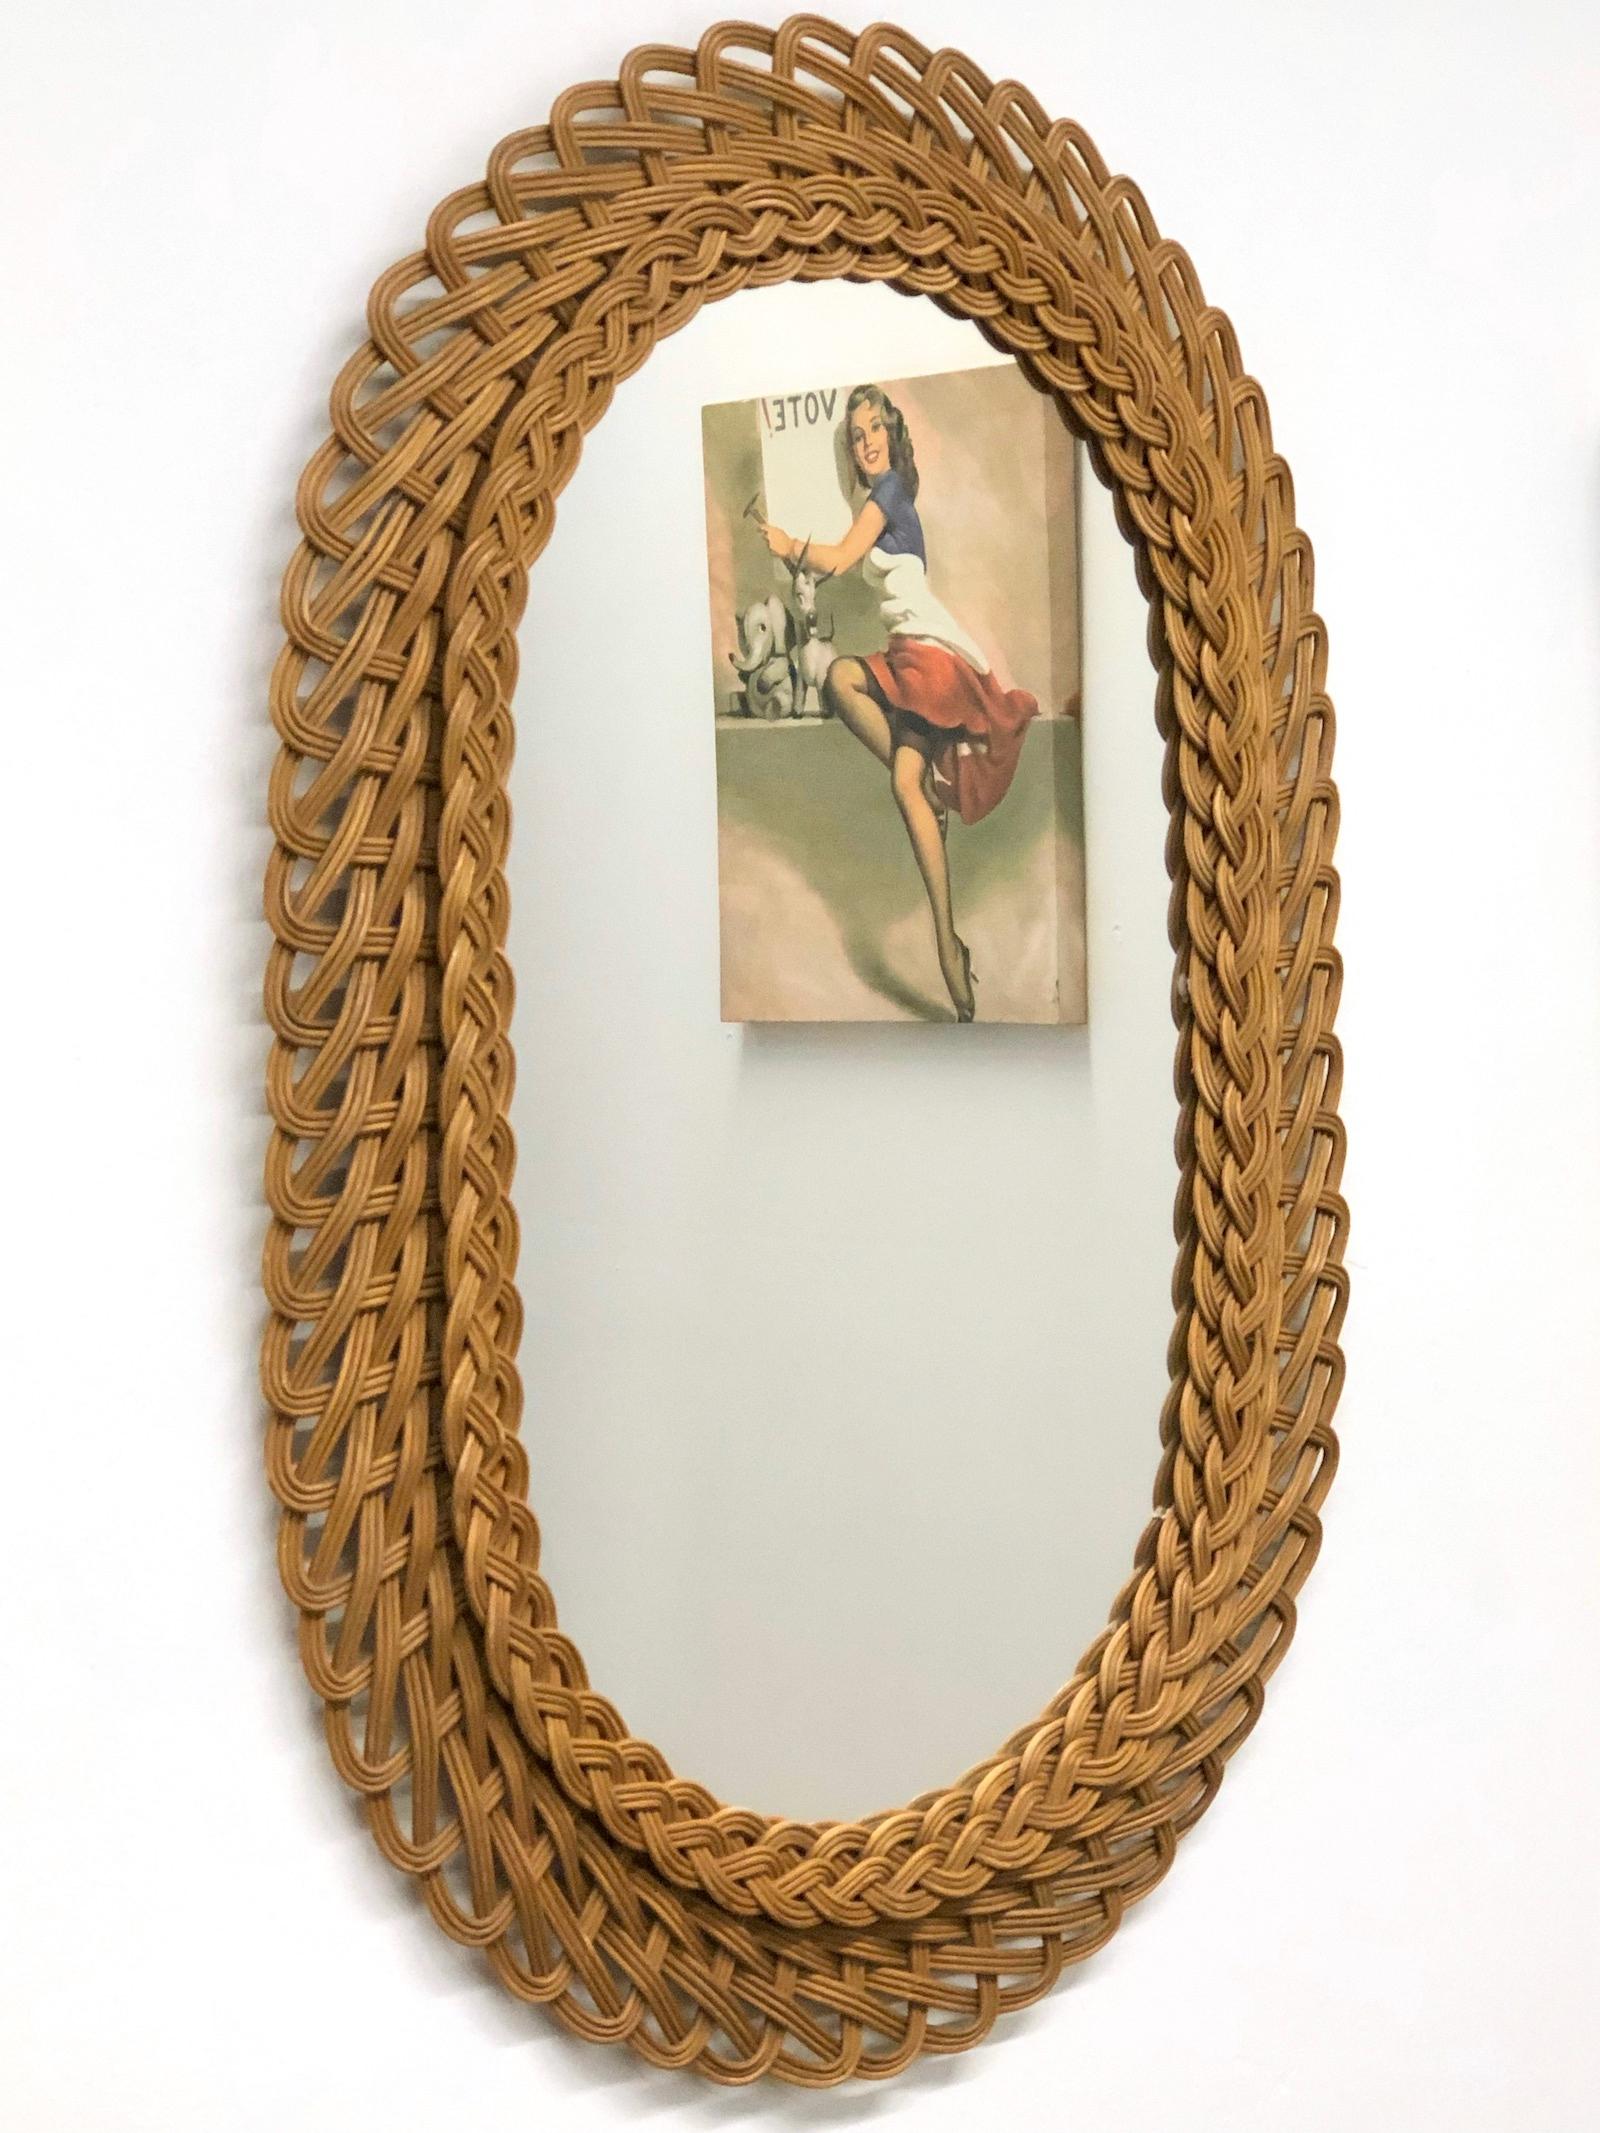 A beautiful handwoven oval shaped rattan and wicker mirror. This mirror has a handcrafted braided work at the frame that makes it highly decorative, Germany, 1960s. May be hung horizontally or vertically.